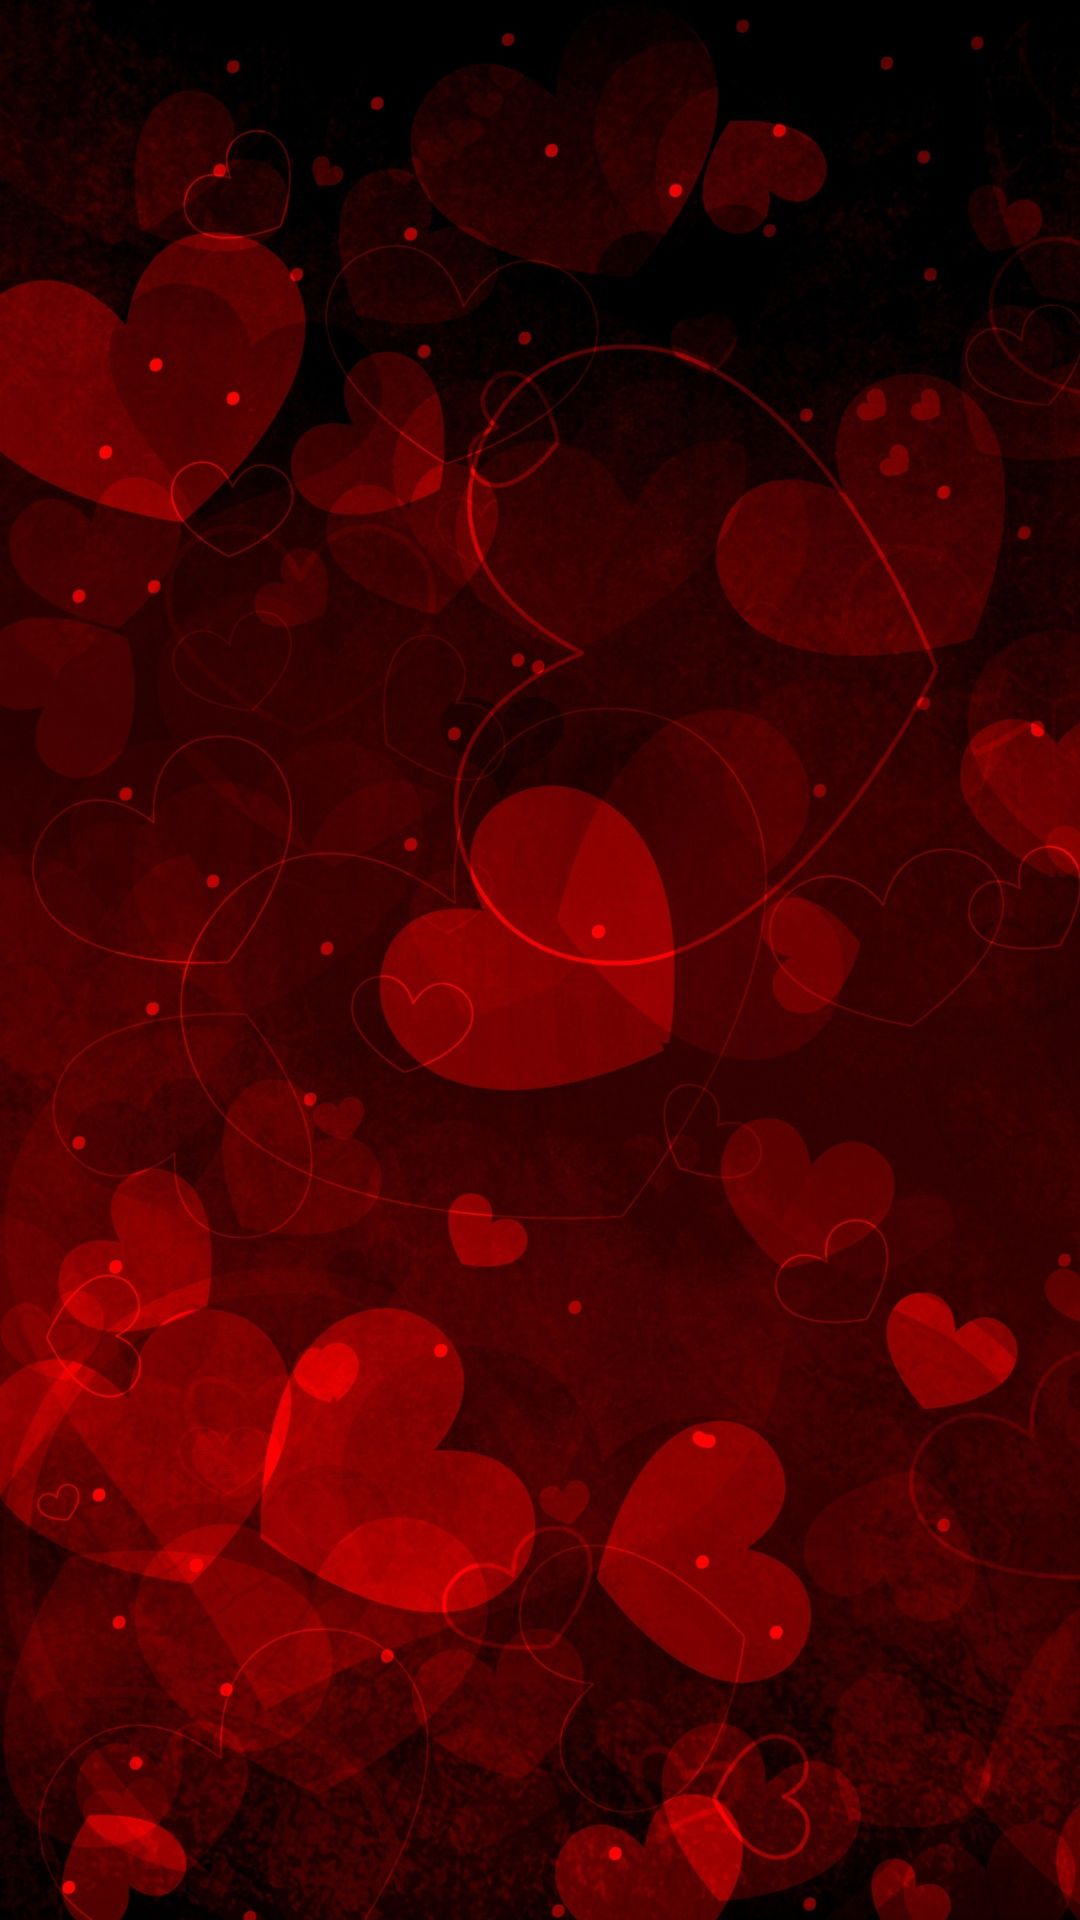 1080x1920 Red Hearts Art Valentine Android wallpaper | Valentines wallpaper iphone, Valentines wallpaper, Heart wallpaper